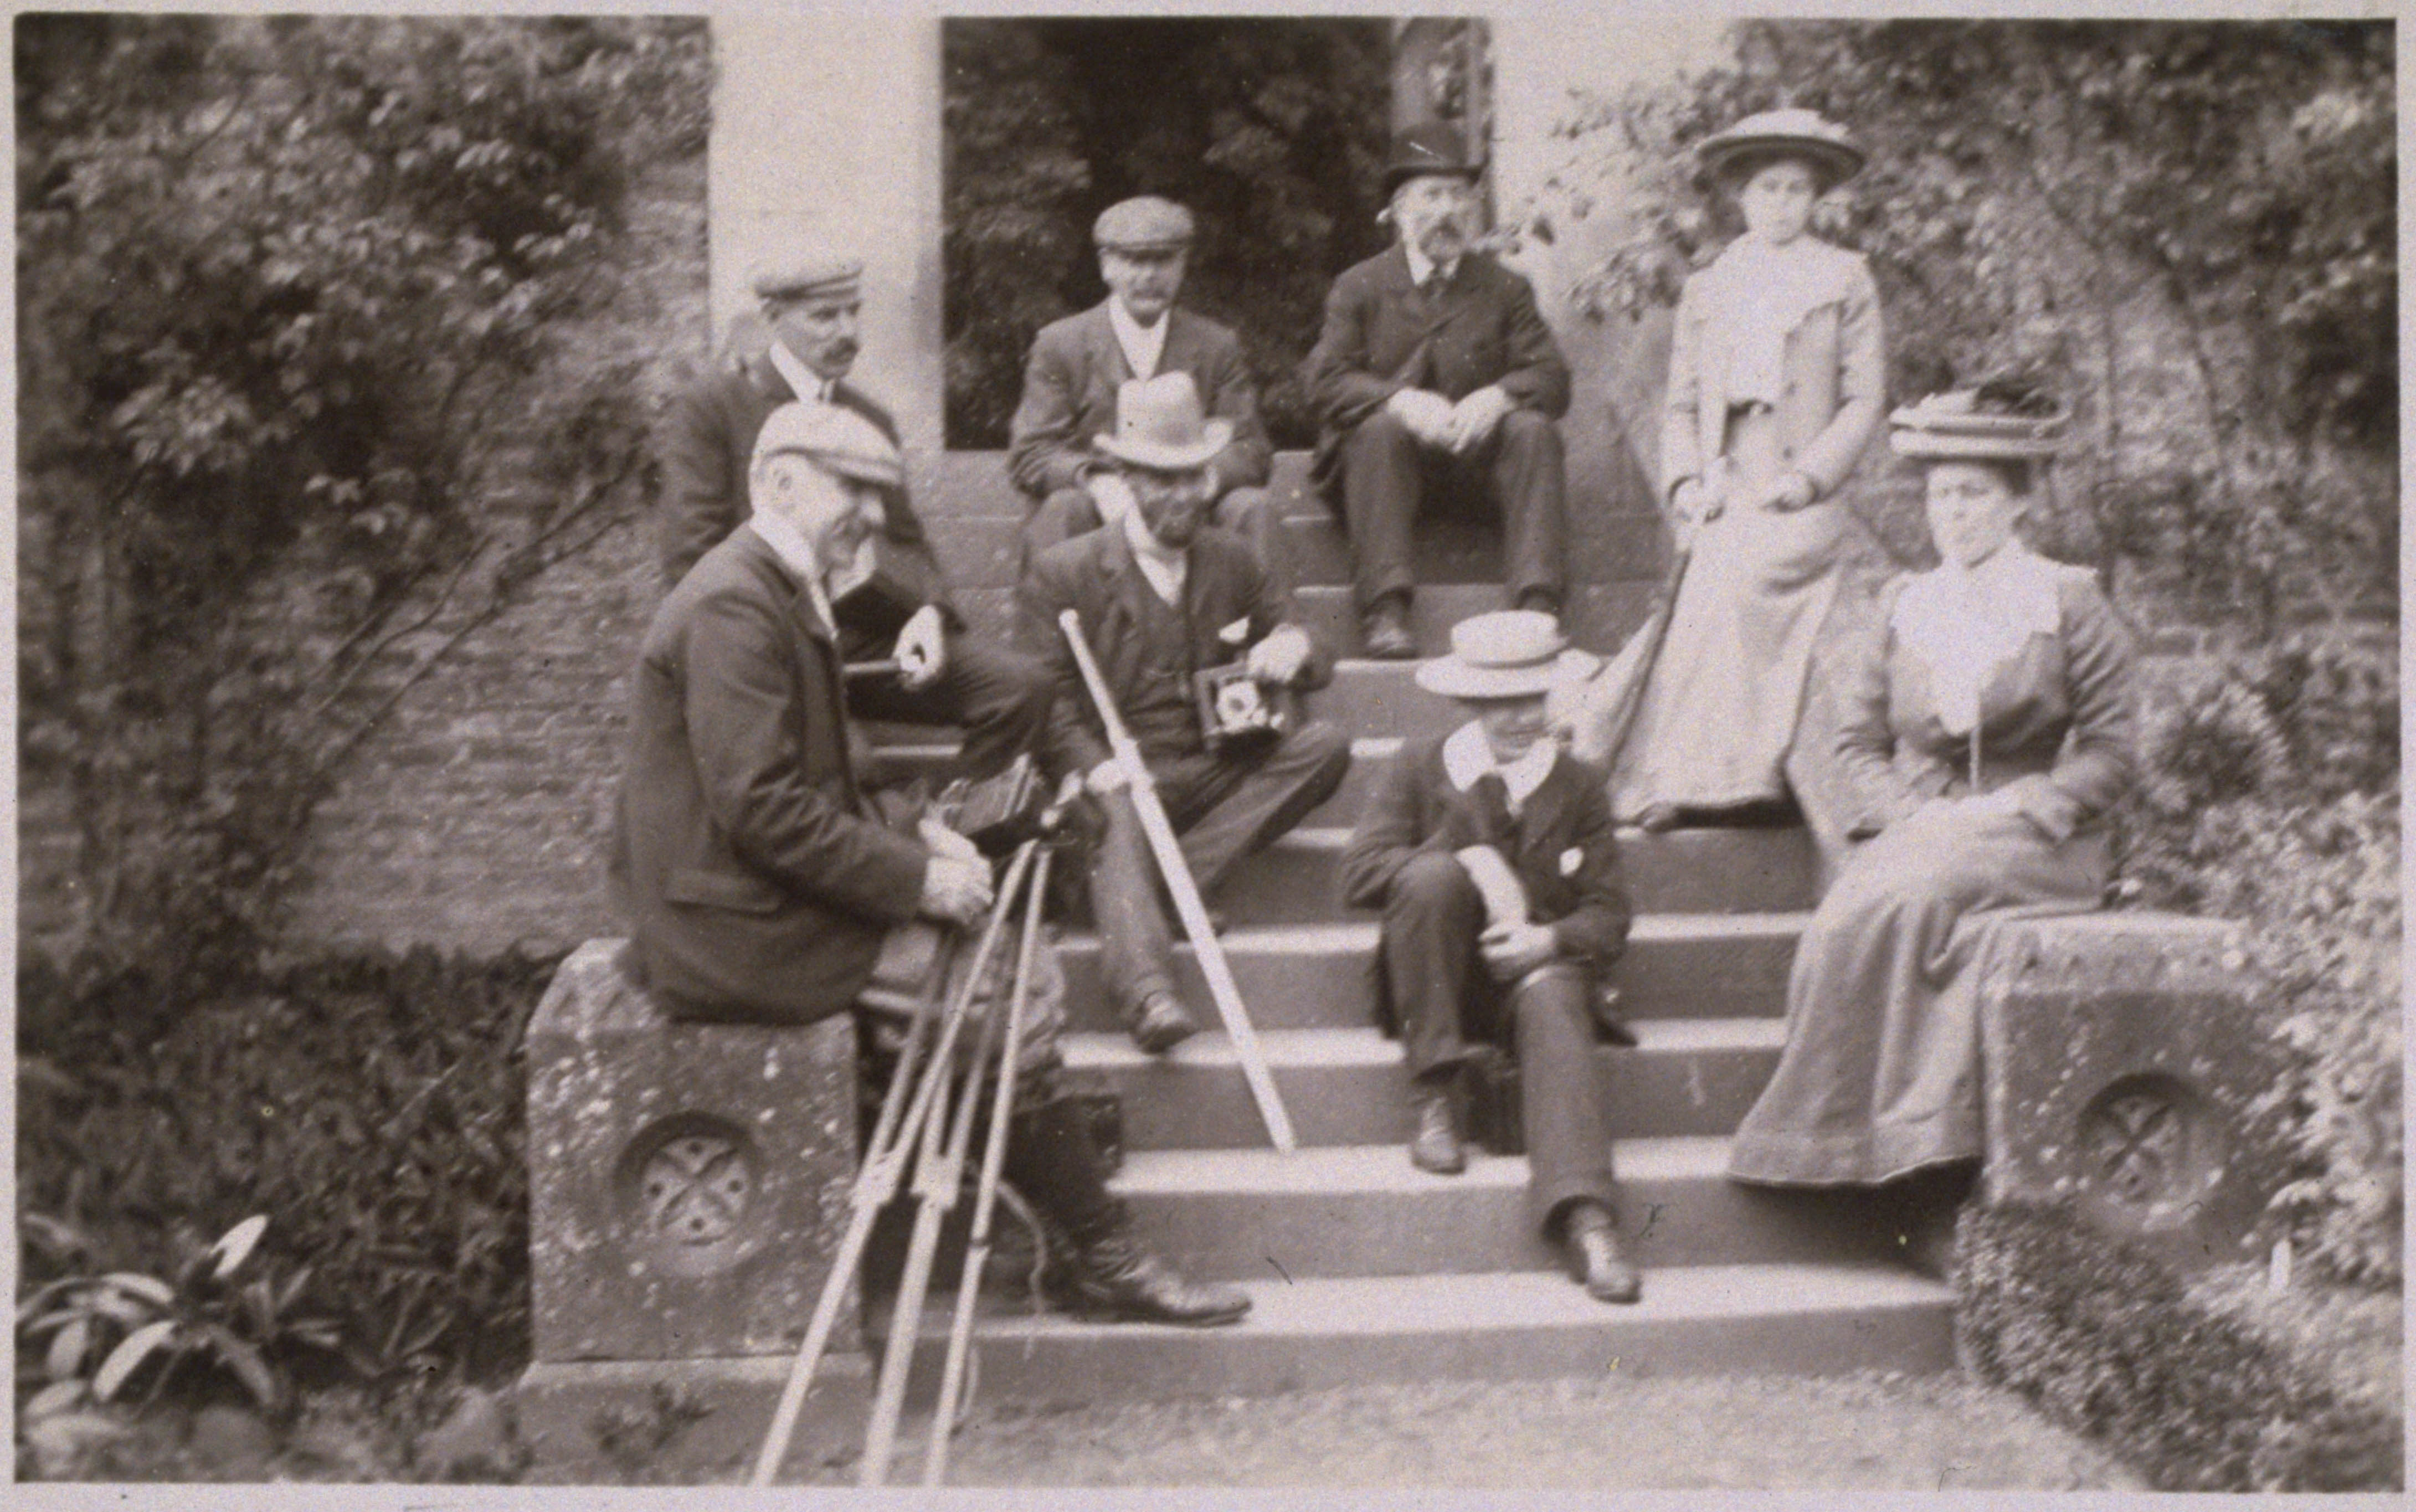 'Group including Steggall family,' by Prof J.E.A. Steggall, 1900 (St Andrews JEAS-26-53)